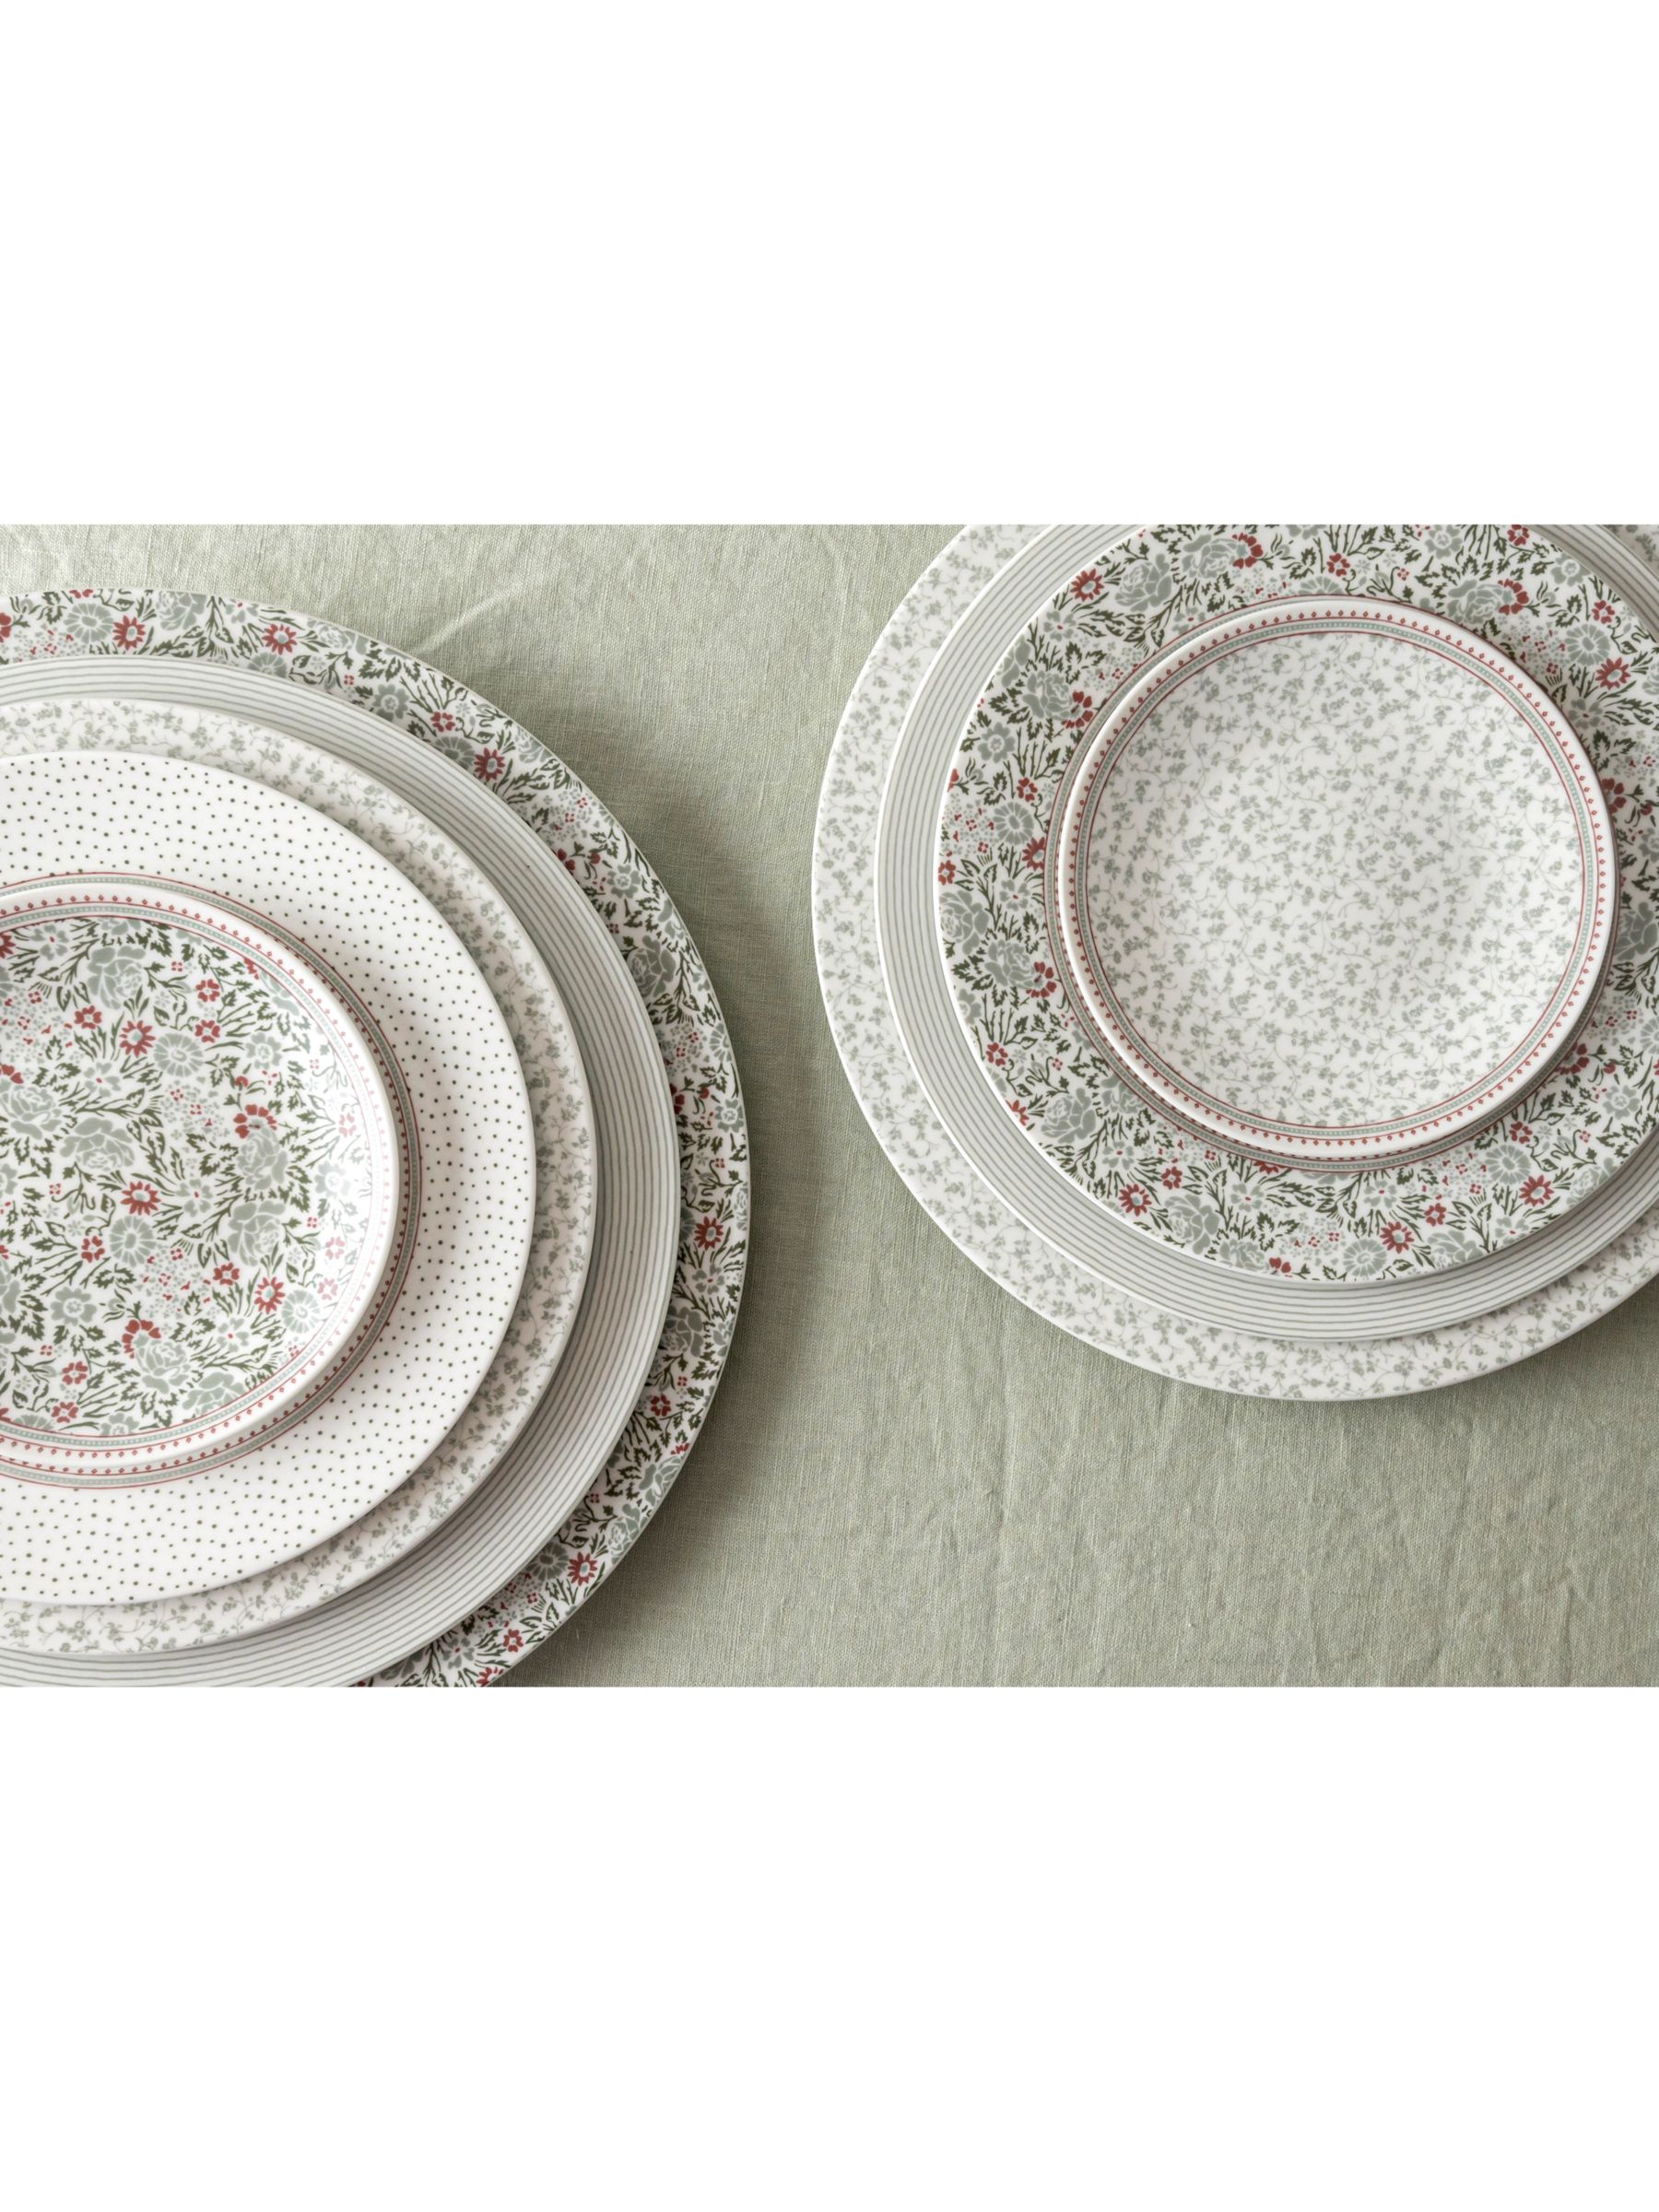 Laura Clematis Set 27.5cm, Green Wild Ashley Plate, Collectables Dinner of 4, White/Sage